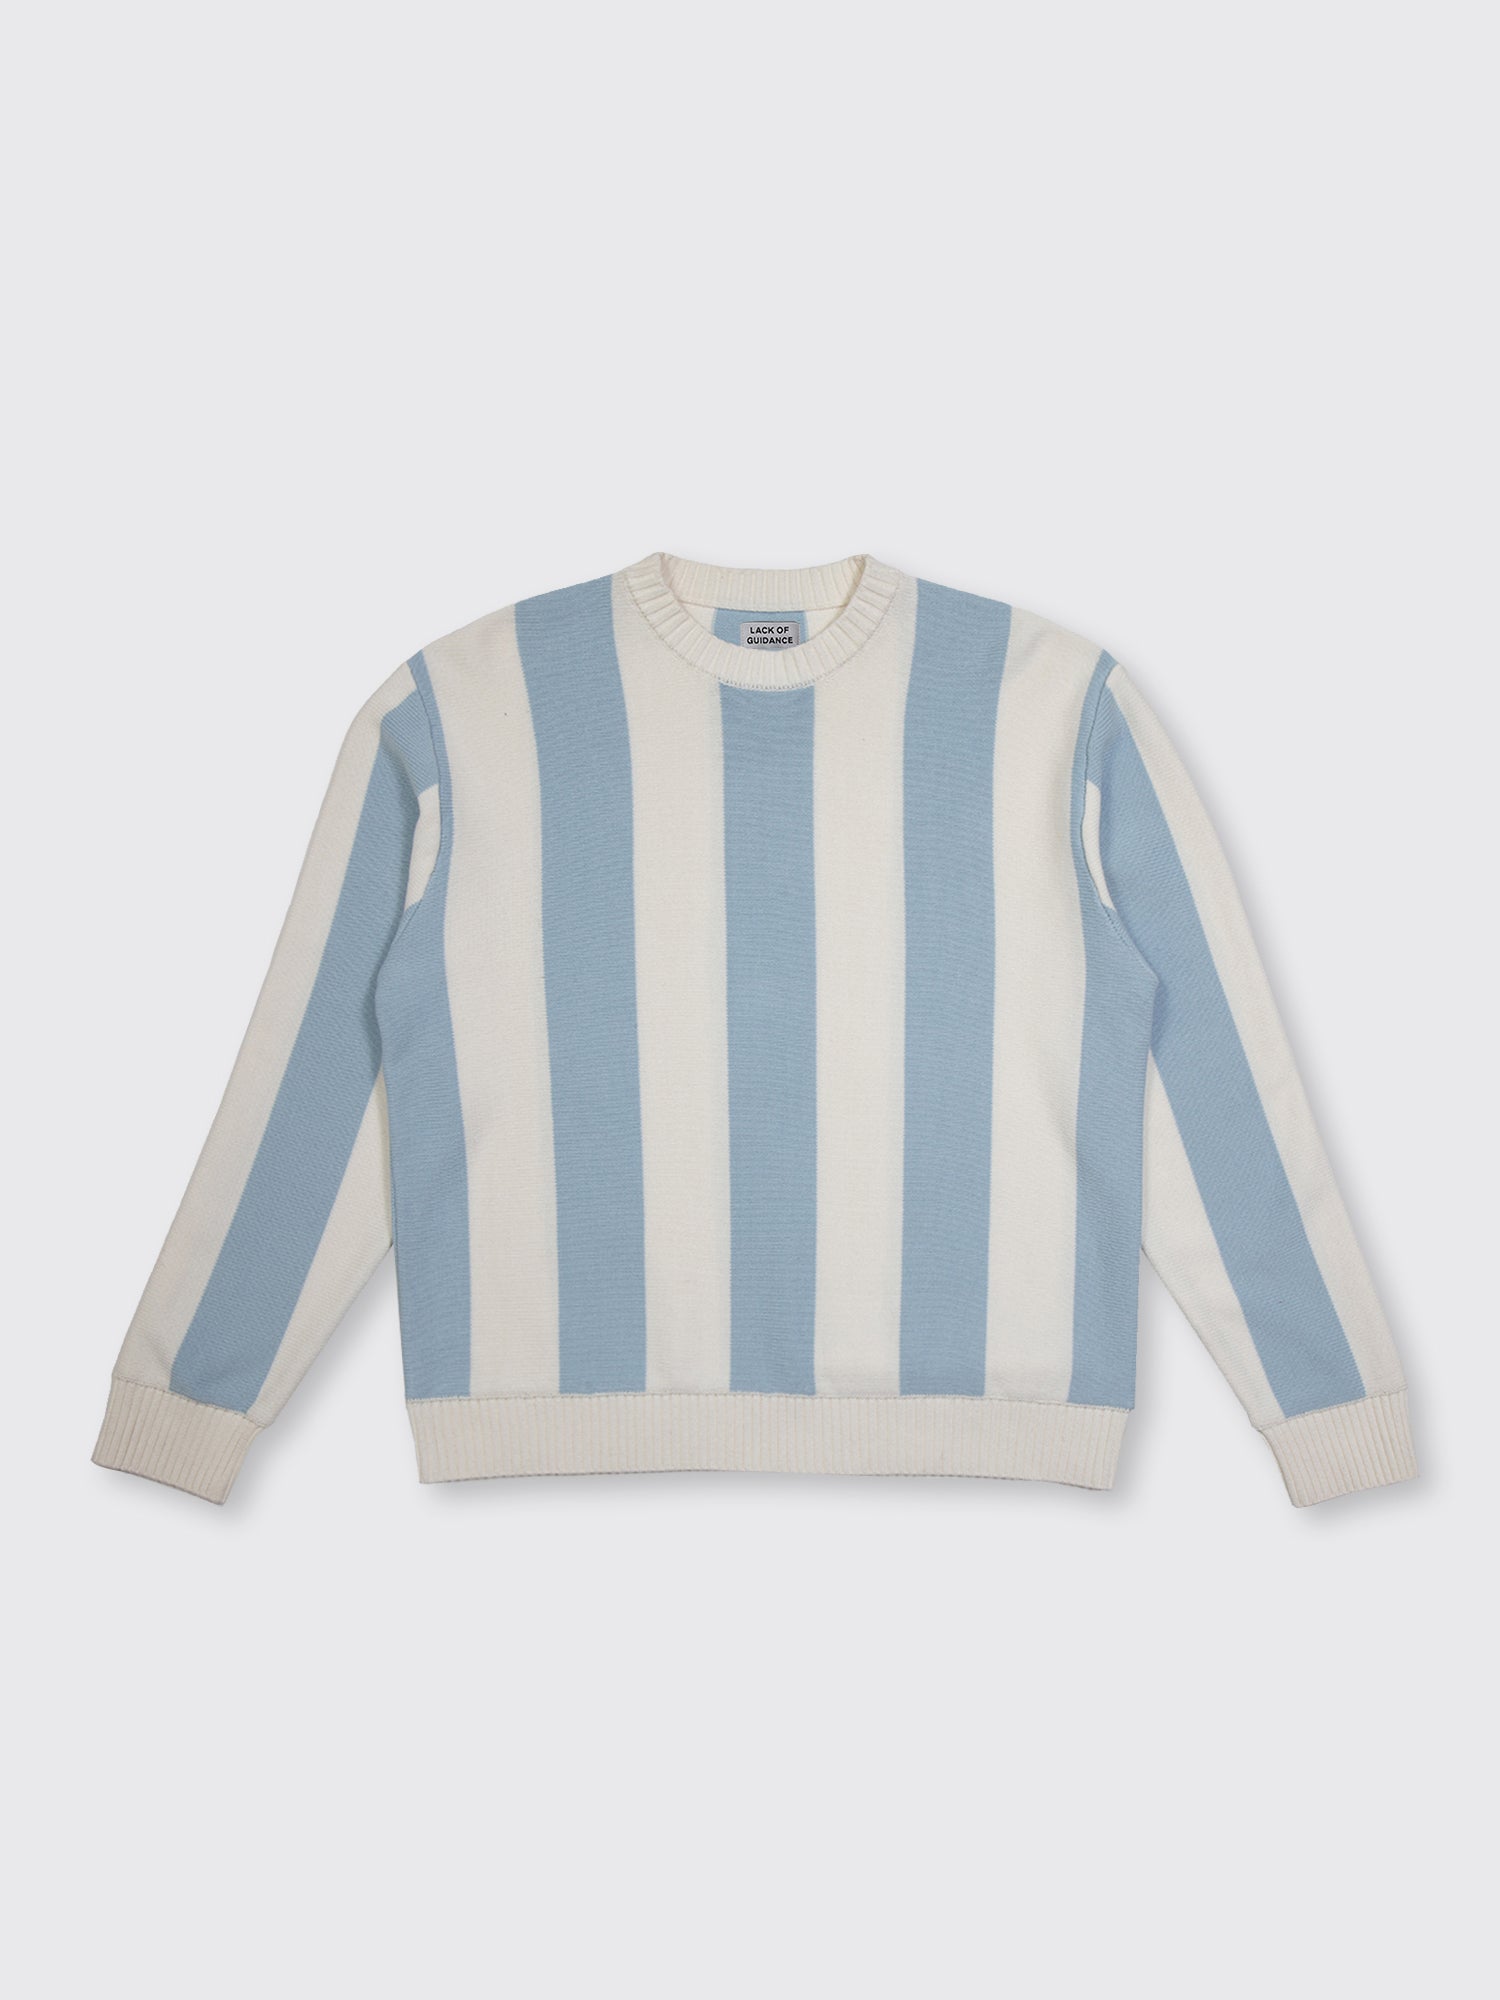 Lionel Knit Sweater (Baby Blue/Off White)